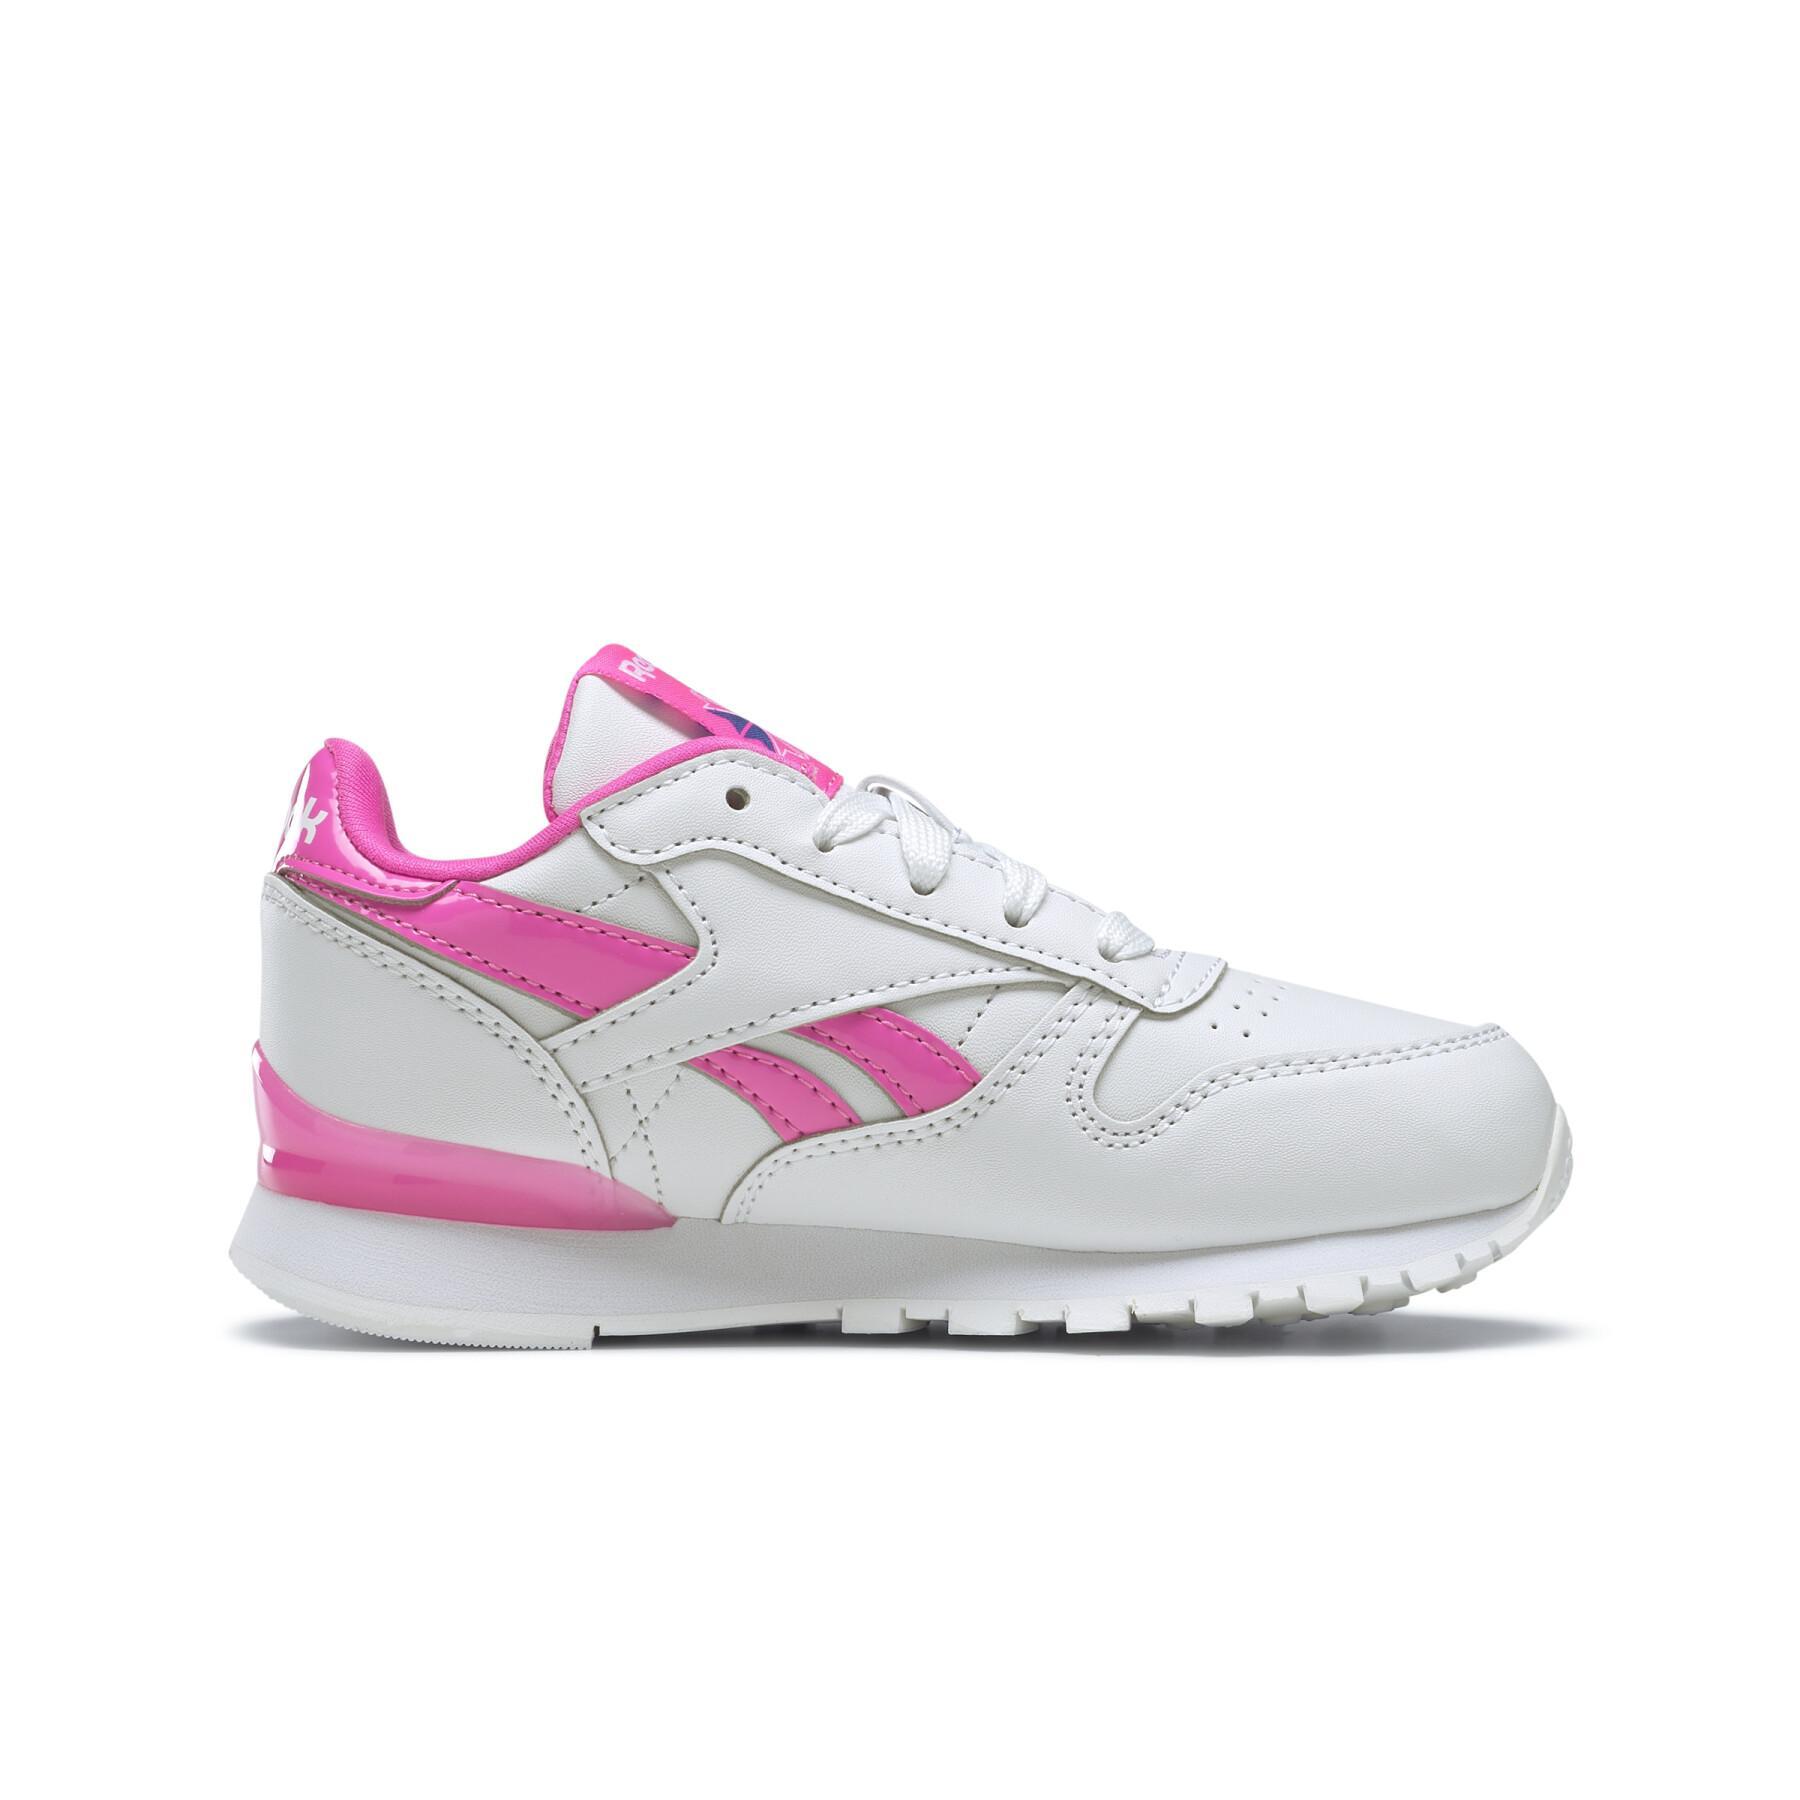 Classic leather sneakers for kids Reebok Classics Step 'n' Flash